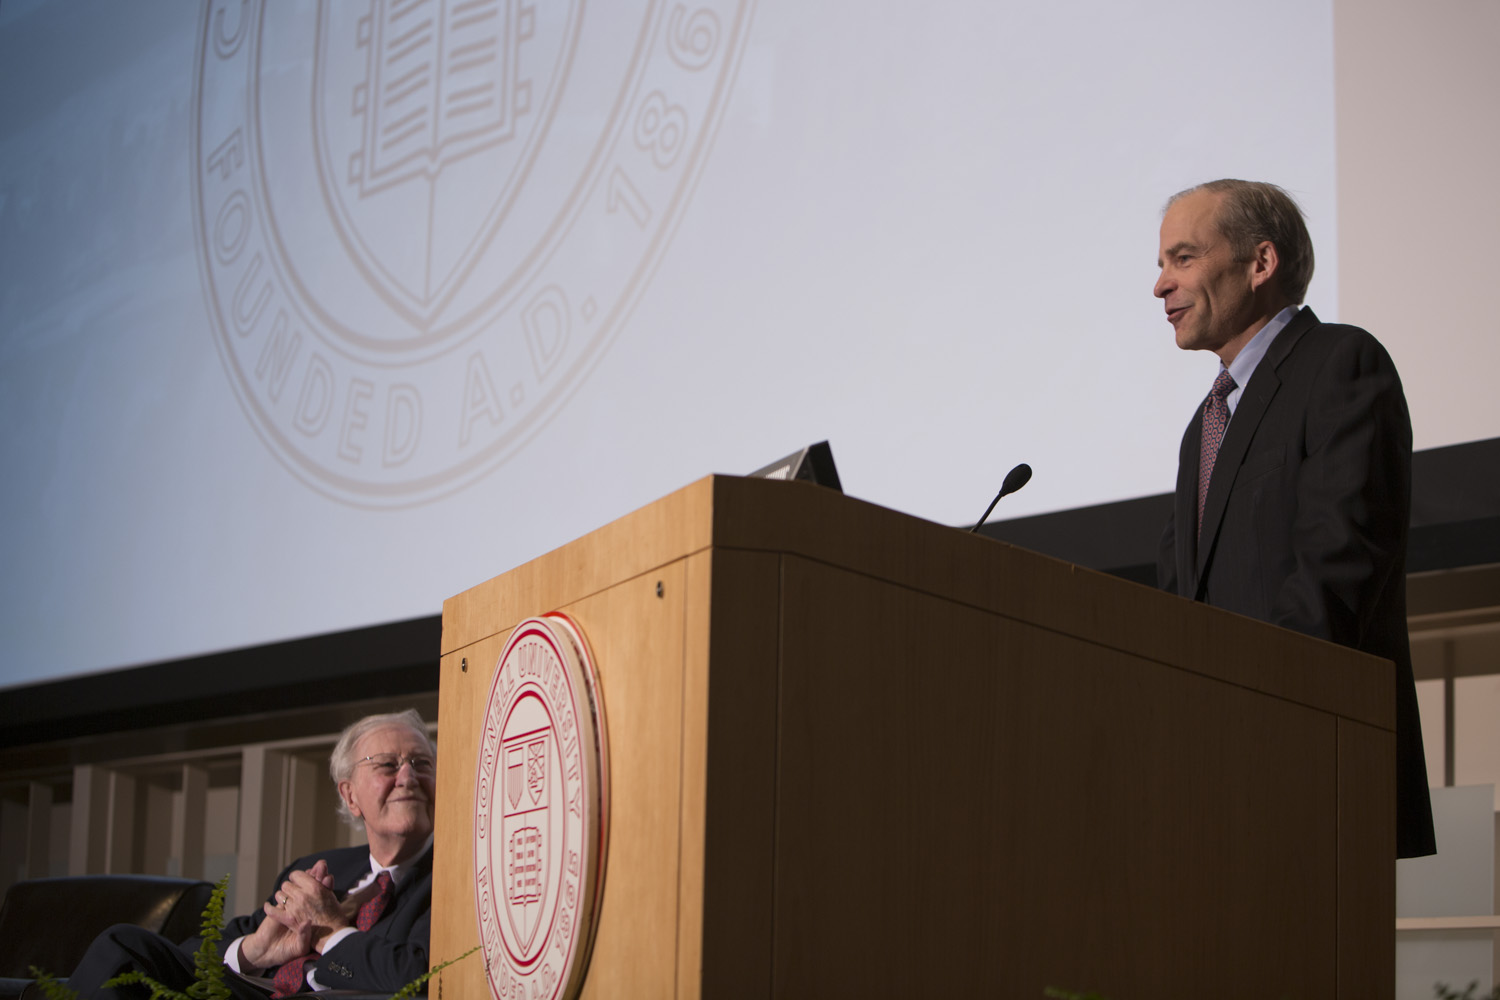 Fisk Johnson addresses students, faculty, alumni and administration at Cornell University today. left to right: Frank H.T. Rhodes, President Emeritus, Cornell University and Fisk Johnson.